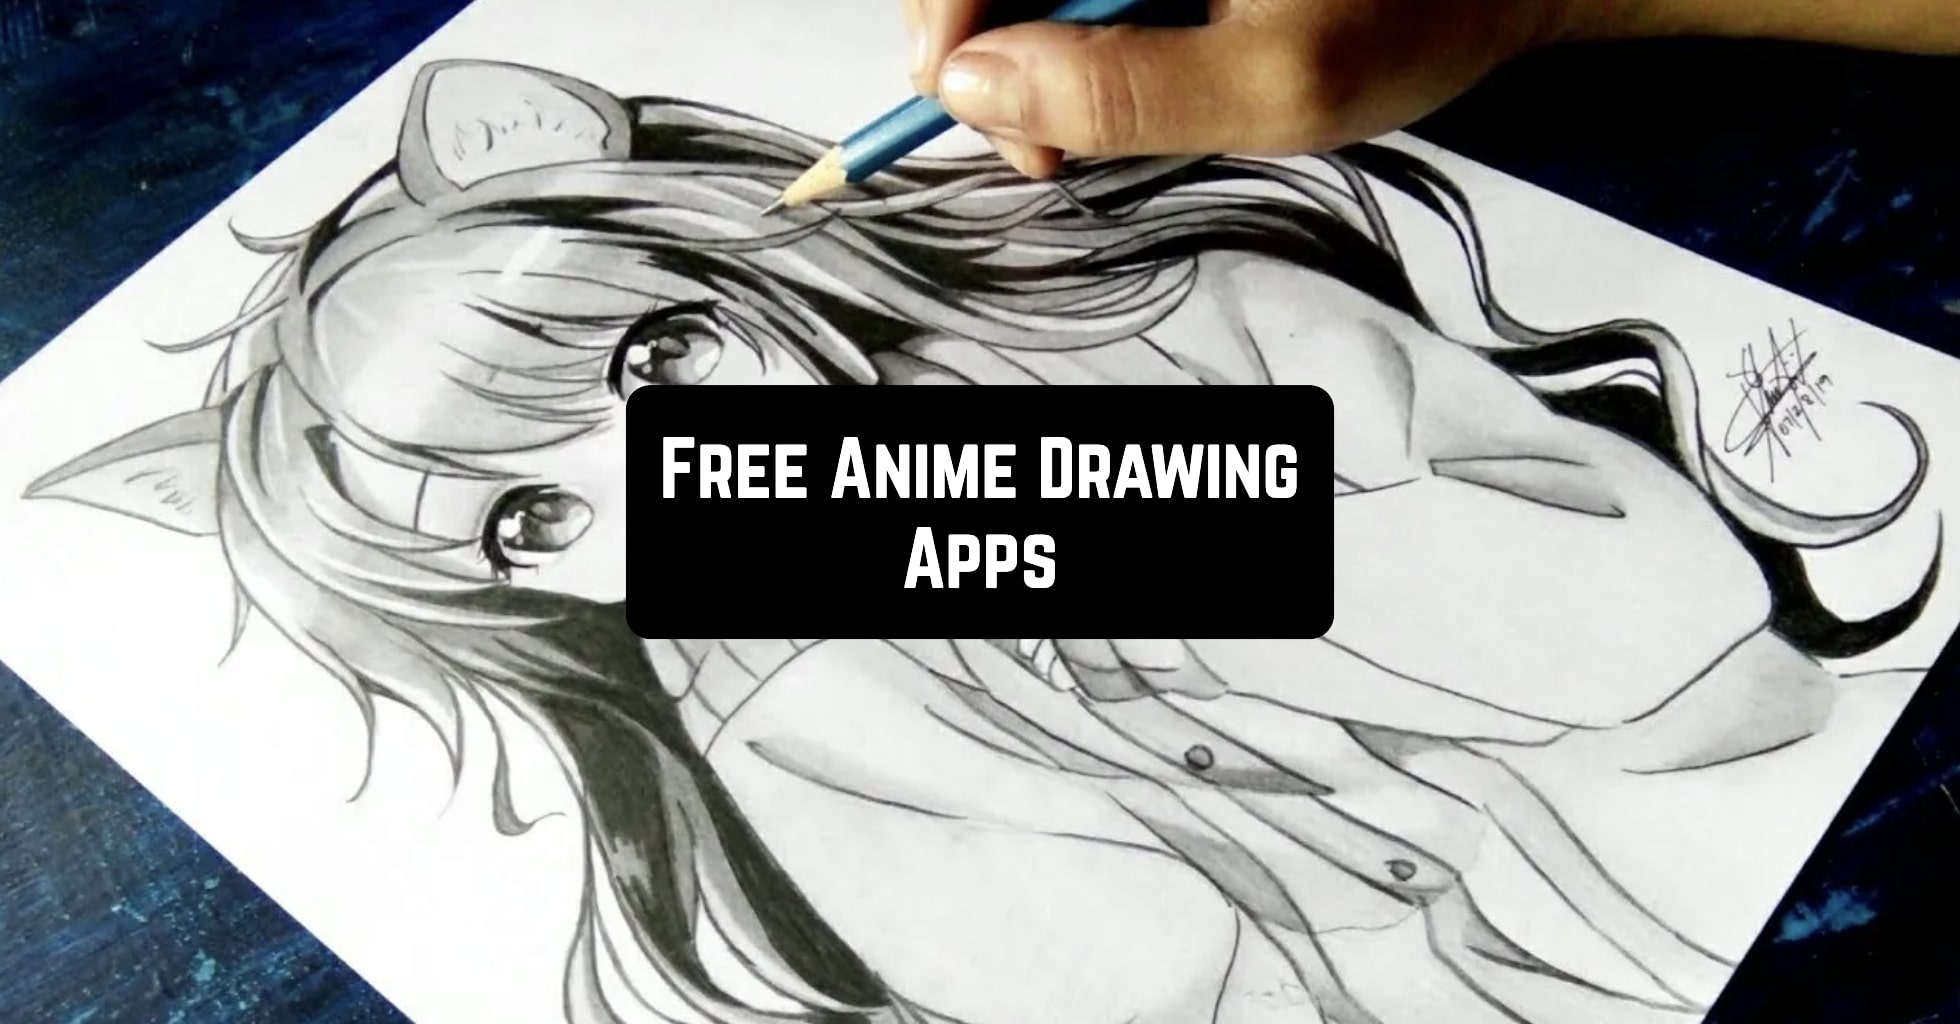 10 Free anime drawing apps for Android & iOS | Free apps for Android and iOS